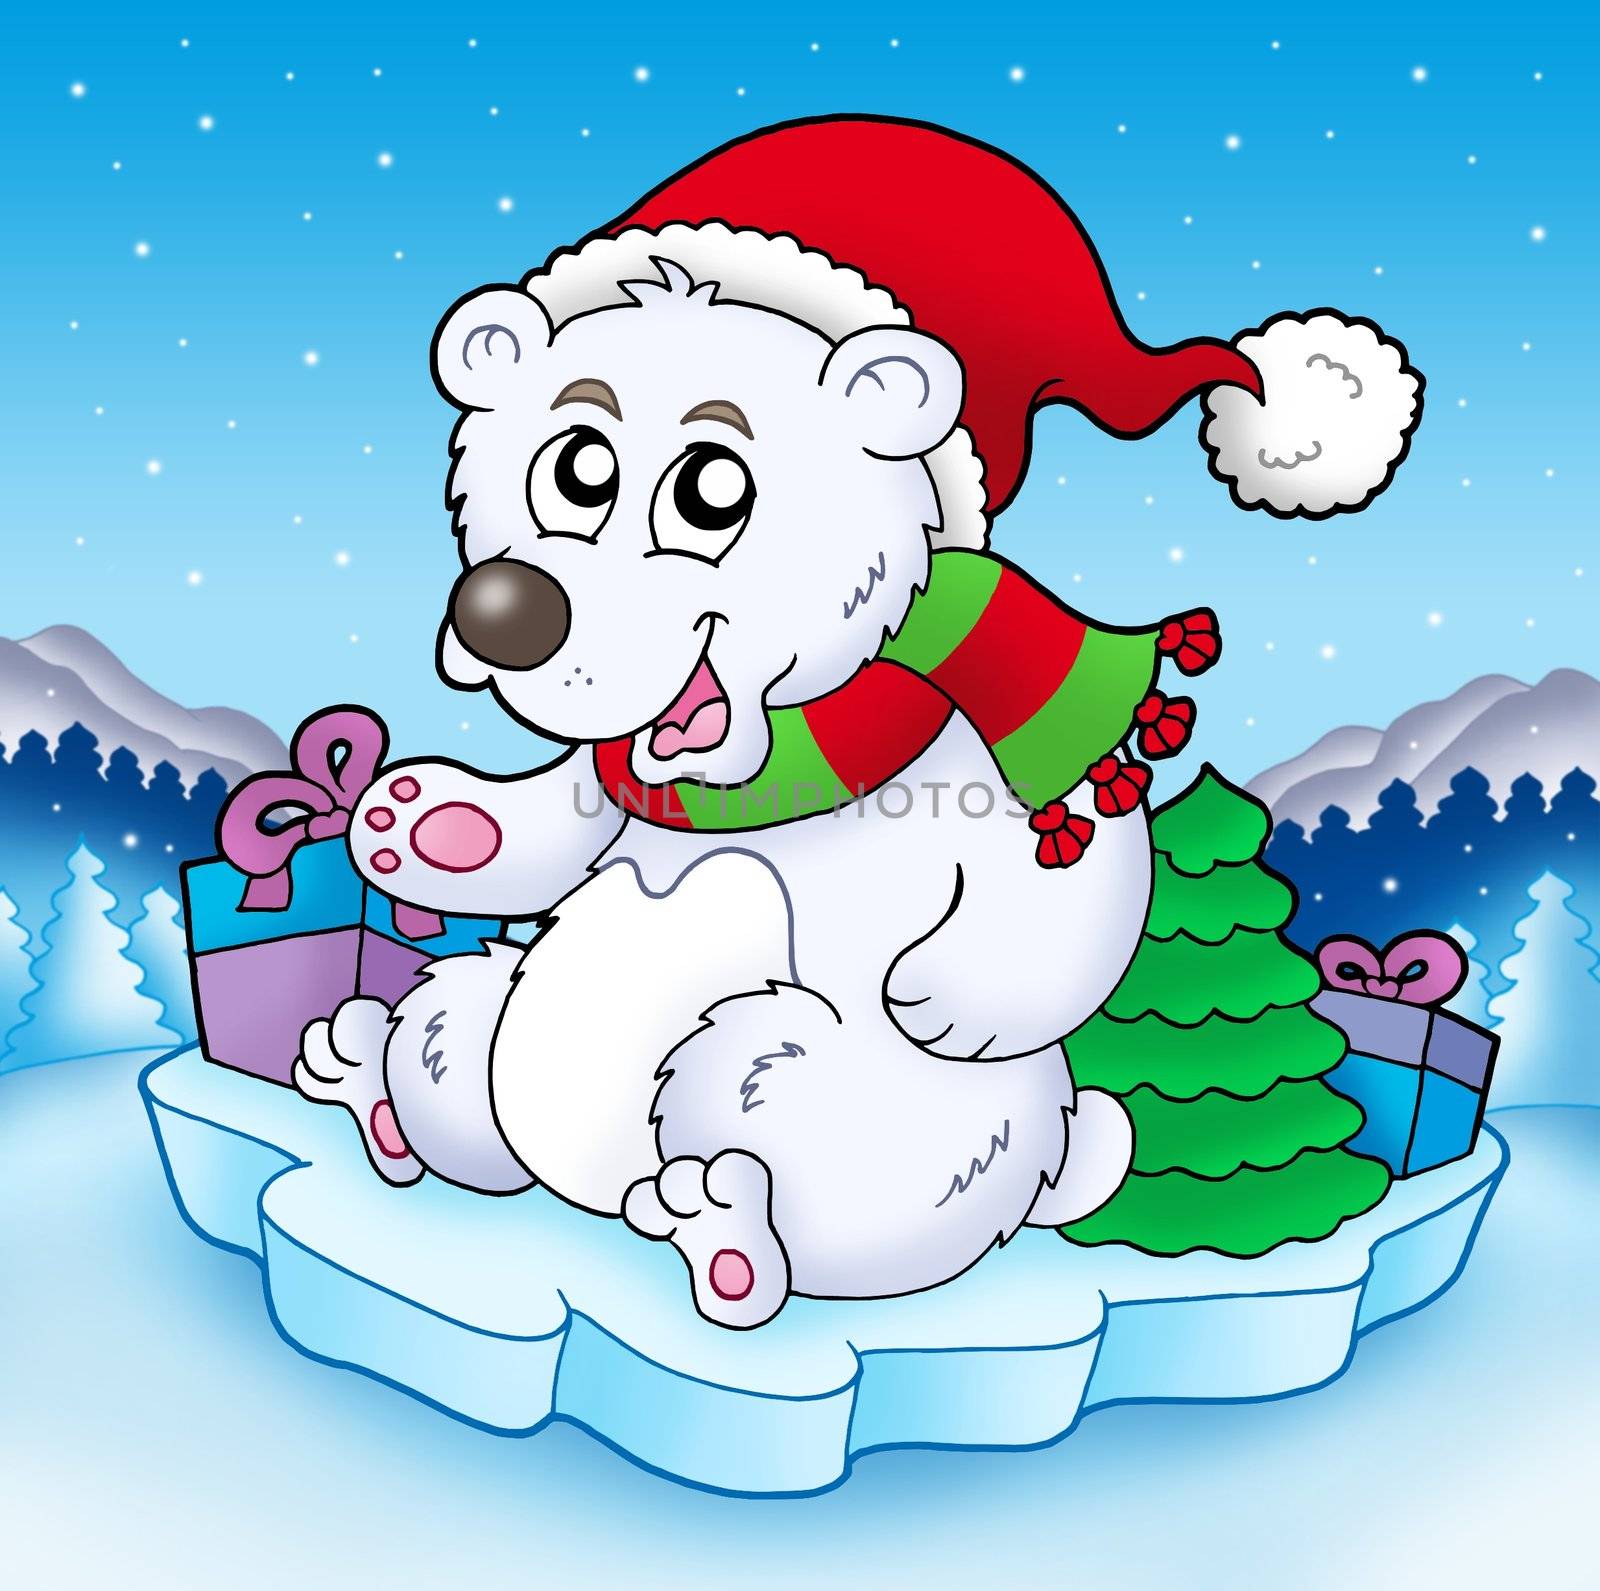 Cute Christmas bear with gifts - color illustration. 